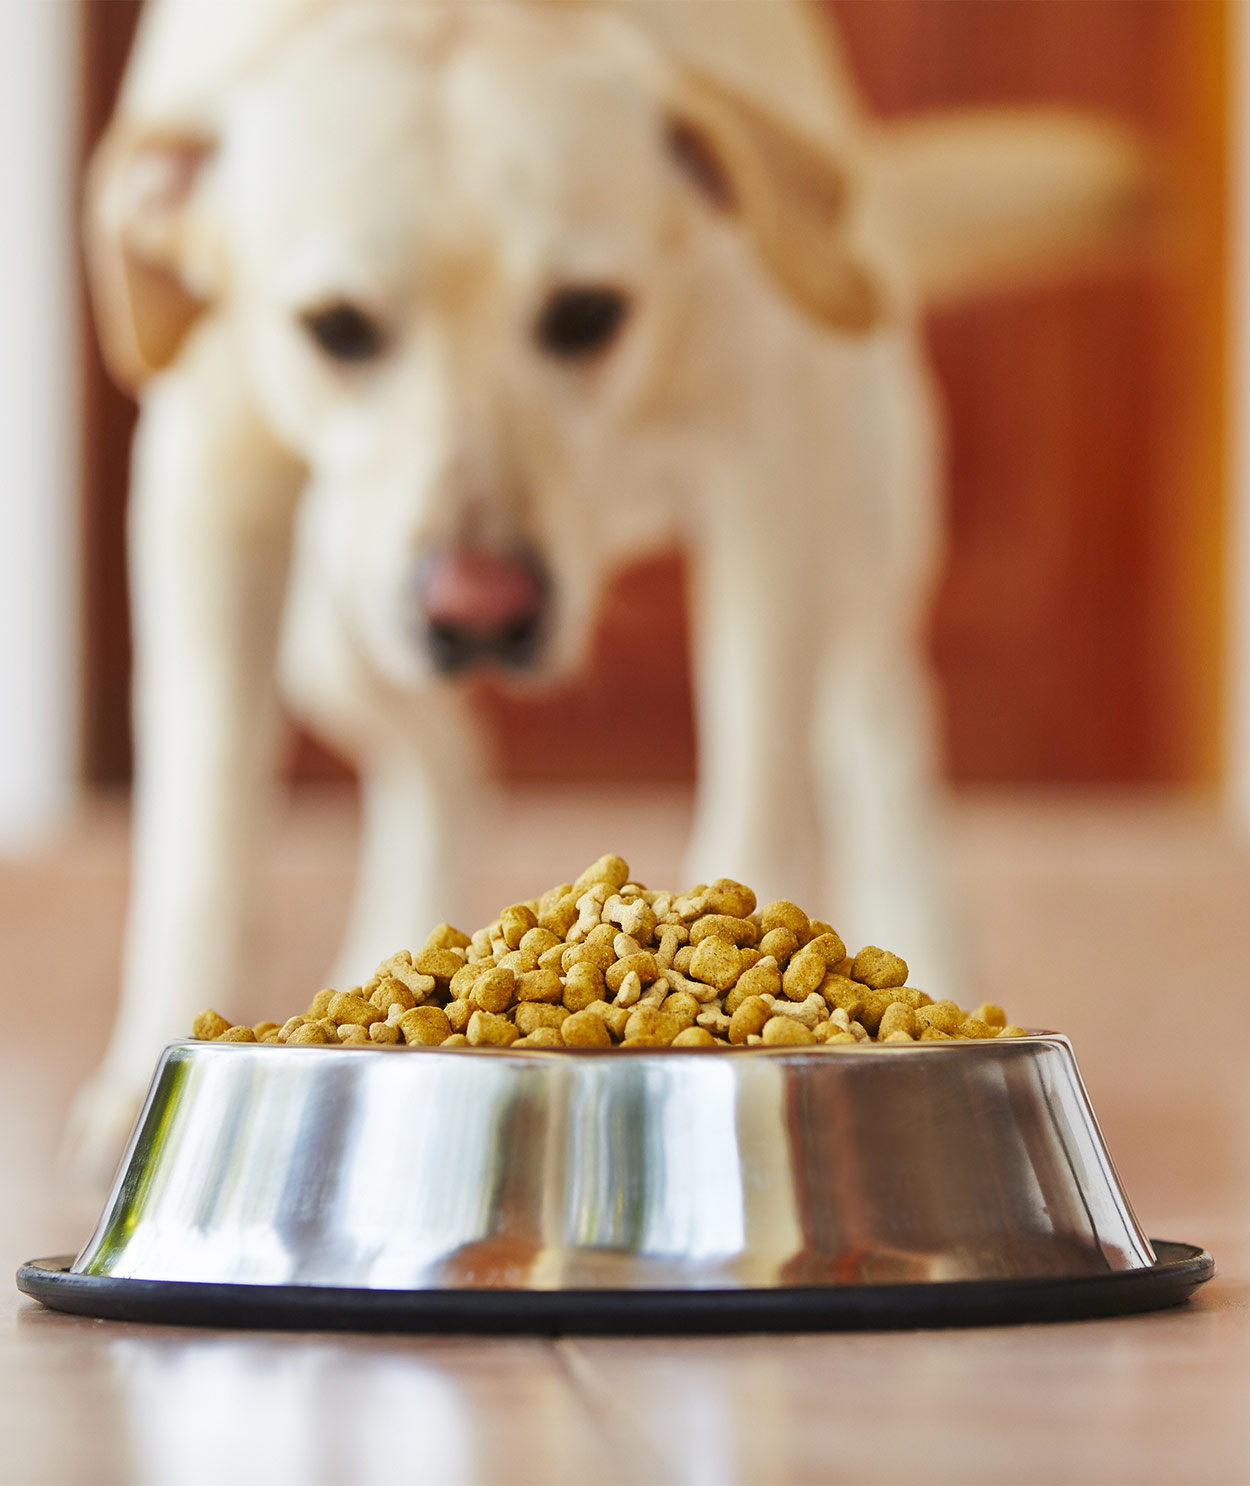 Best High Protein Dog Food To Enrich Your Pet's Diet